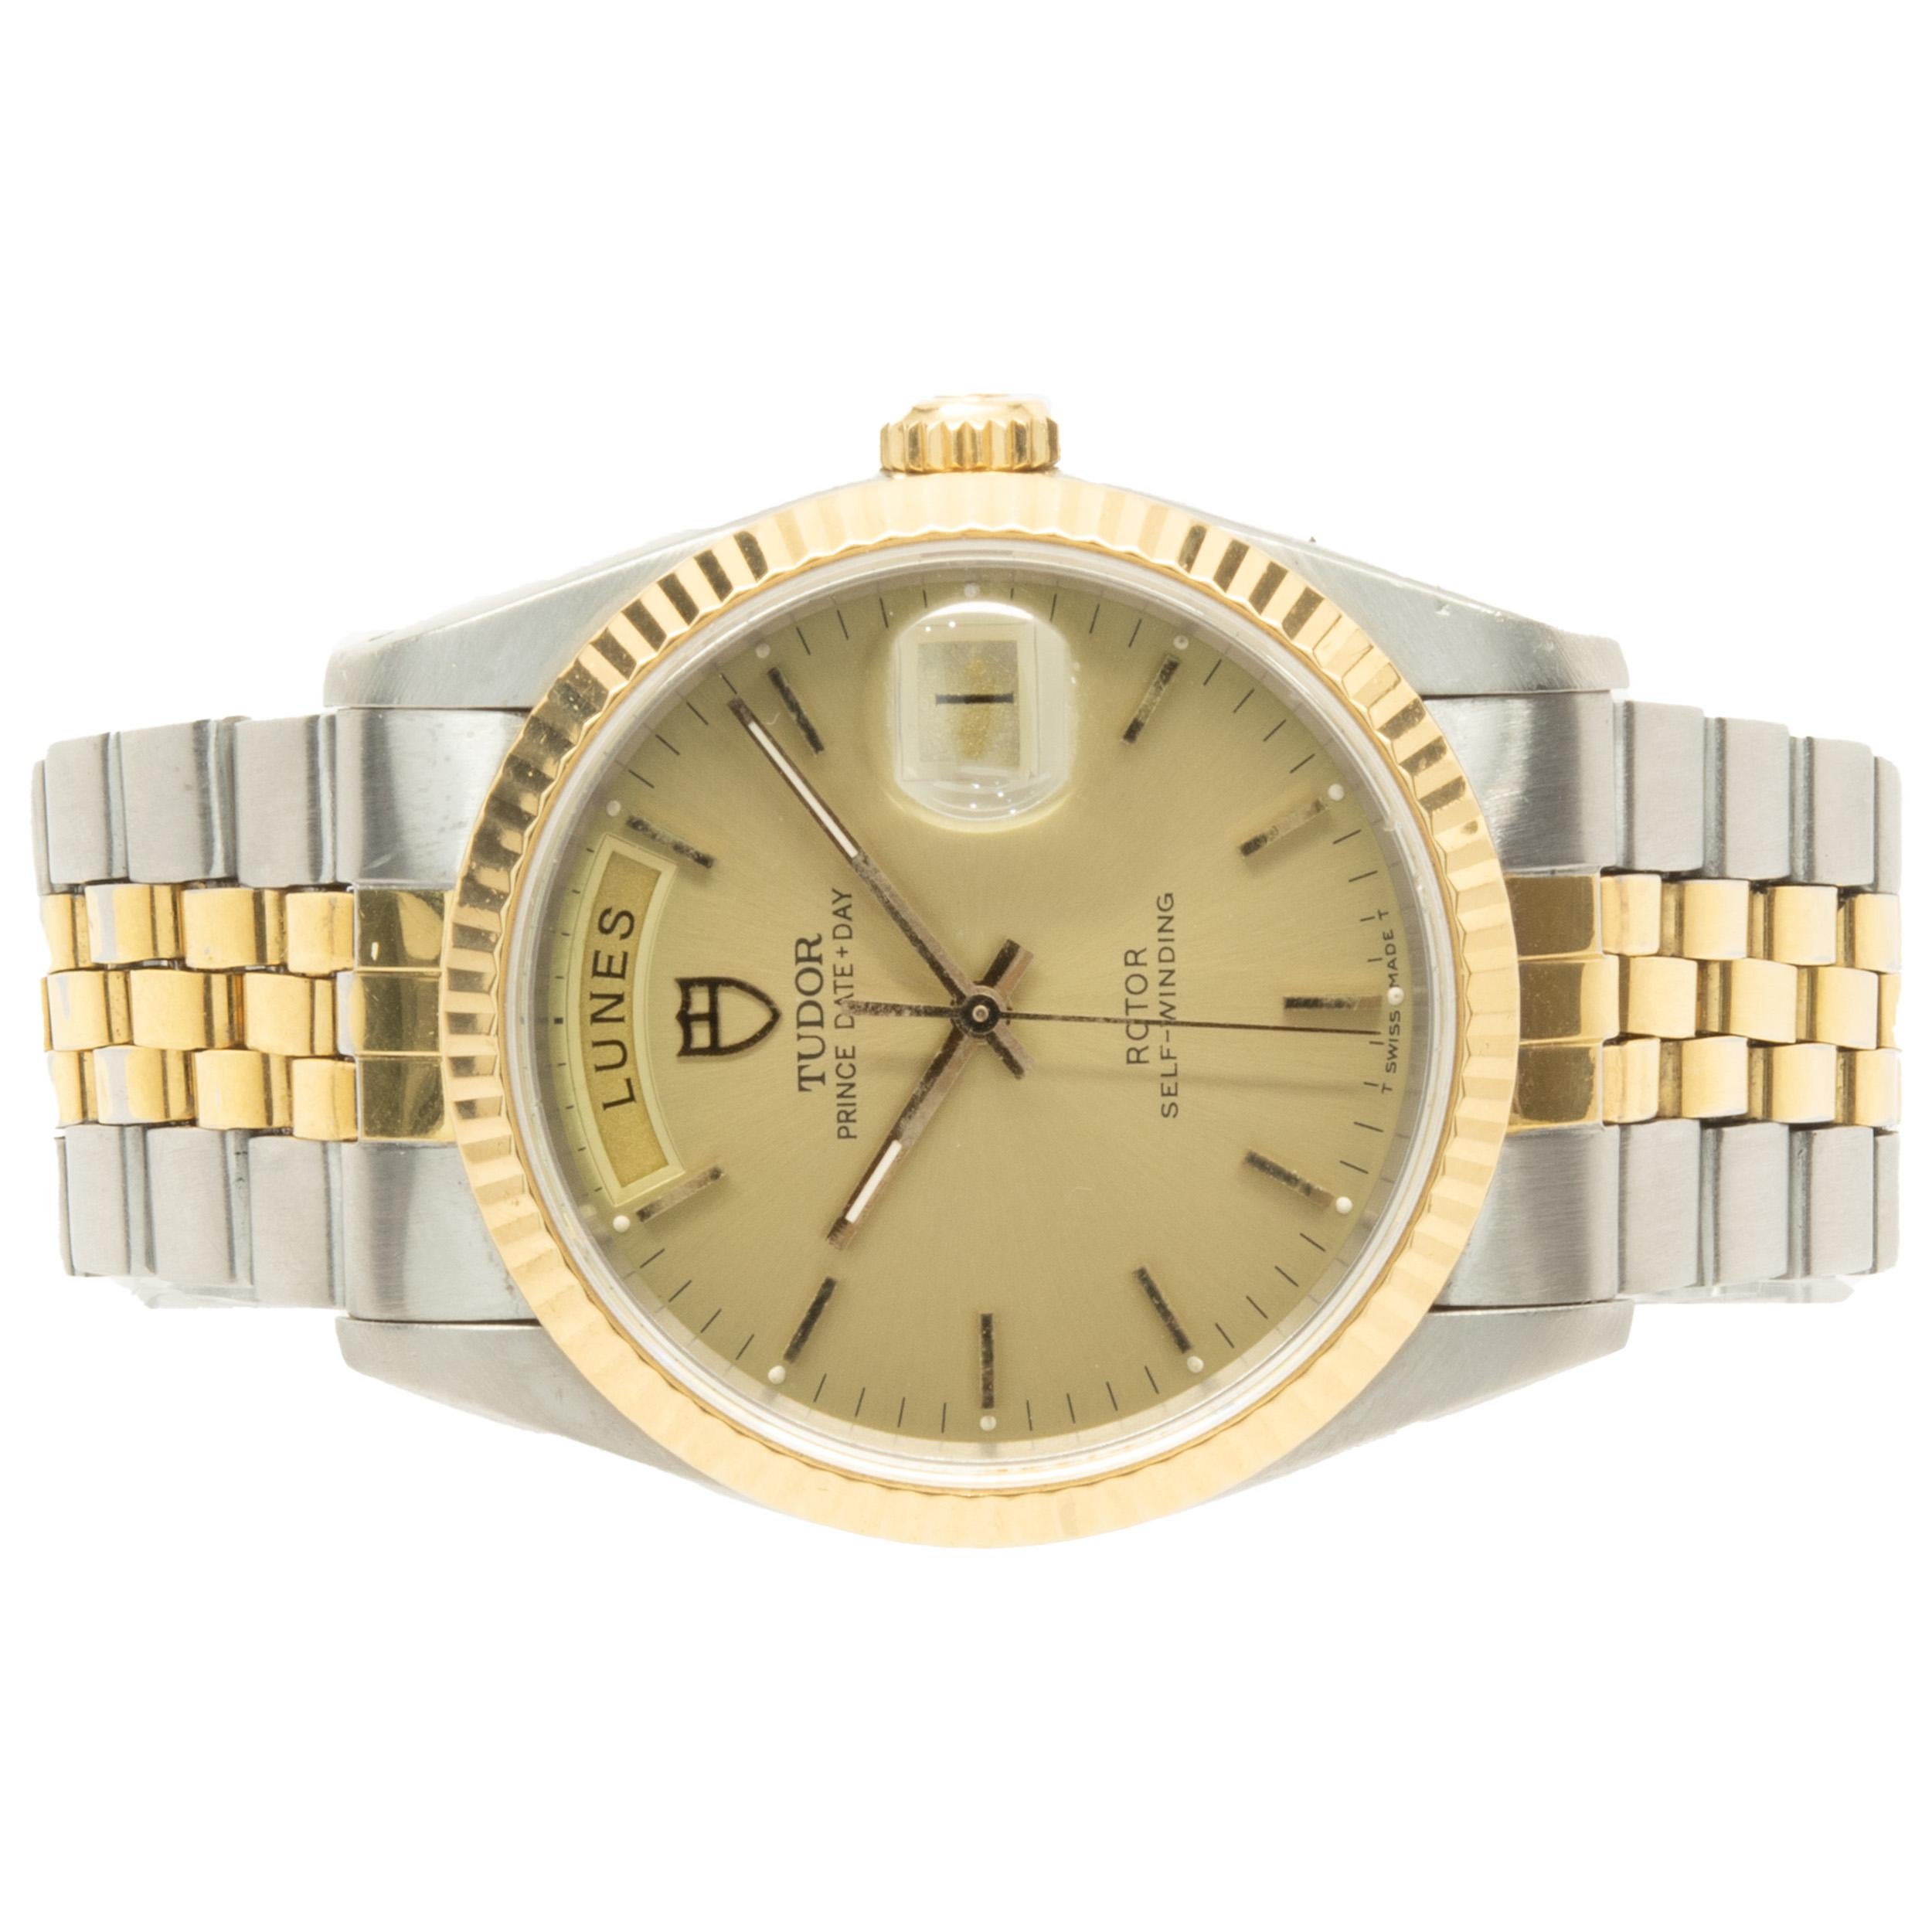 Movement: automatic
Function: hours, minutes, seconds, date
Case: round 36mm stainless steel case, screw-down crown, sapphire protective crystal, fluted bezel
Dial: champagne stick
Band: stainless steel & gold plated jubilee bracelet, integrated